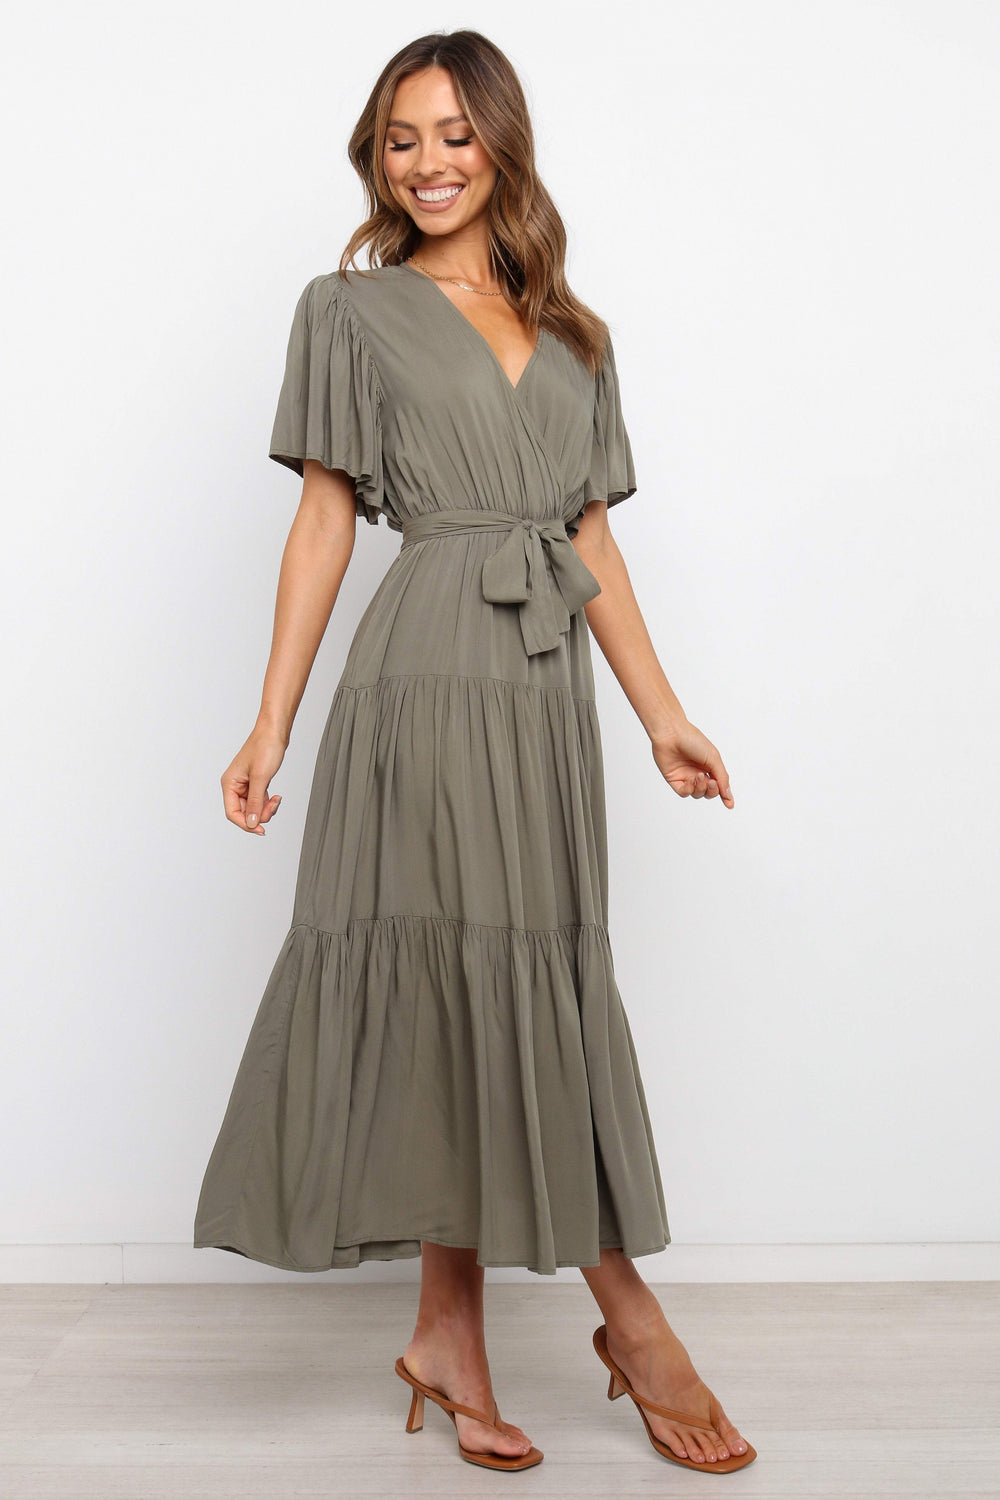 DRESSES Barker Dress -  Midi length, flutter sleeve, wrap dress in a classic neutral olive. V-Neck line with a bow to complete the wrap waist look. Perfect for wedding guests, baby showers and sprinkles, day dates, hens parties and more! A luxe yet affordable staple for every woman's closet. 